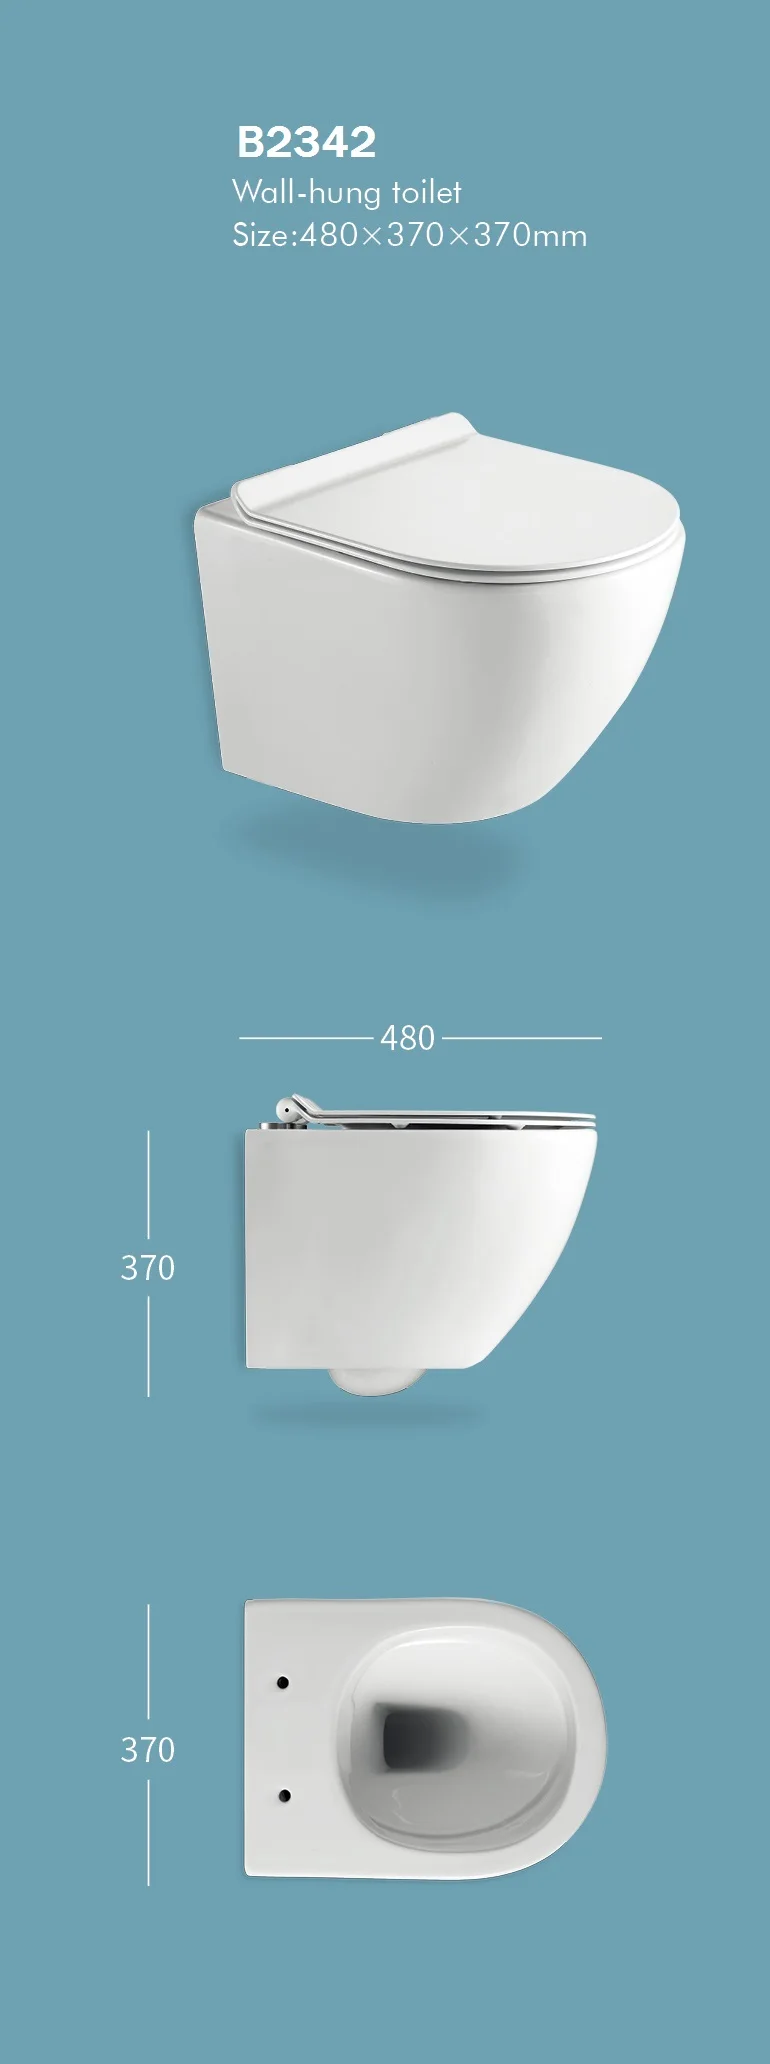 PATE matt cement grey wall mounted wc toilet CE rimless wall hung toilet india